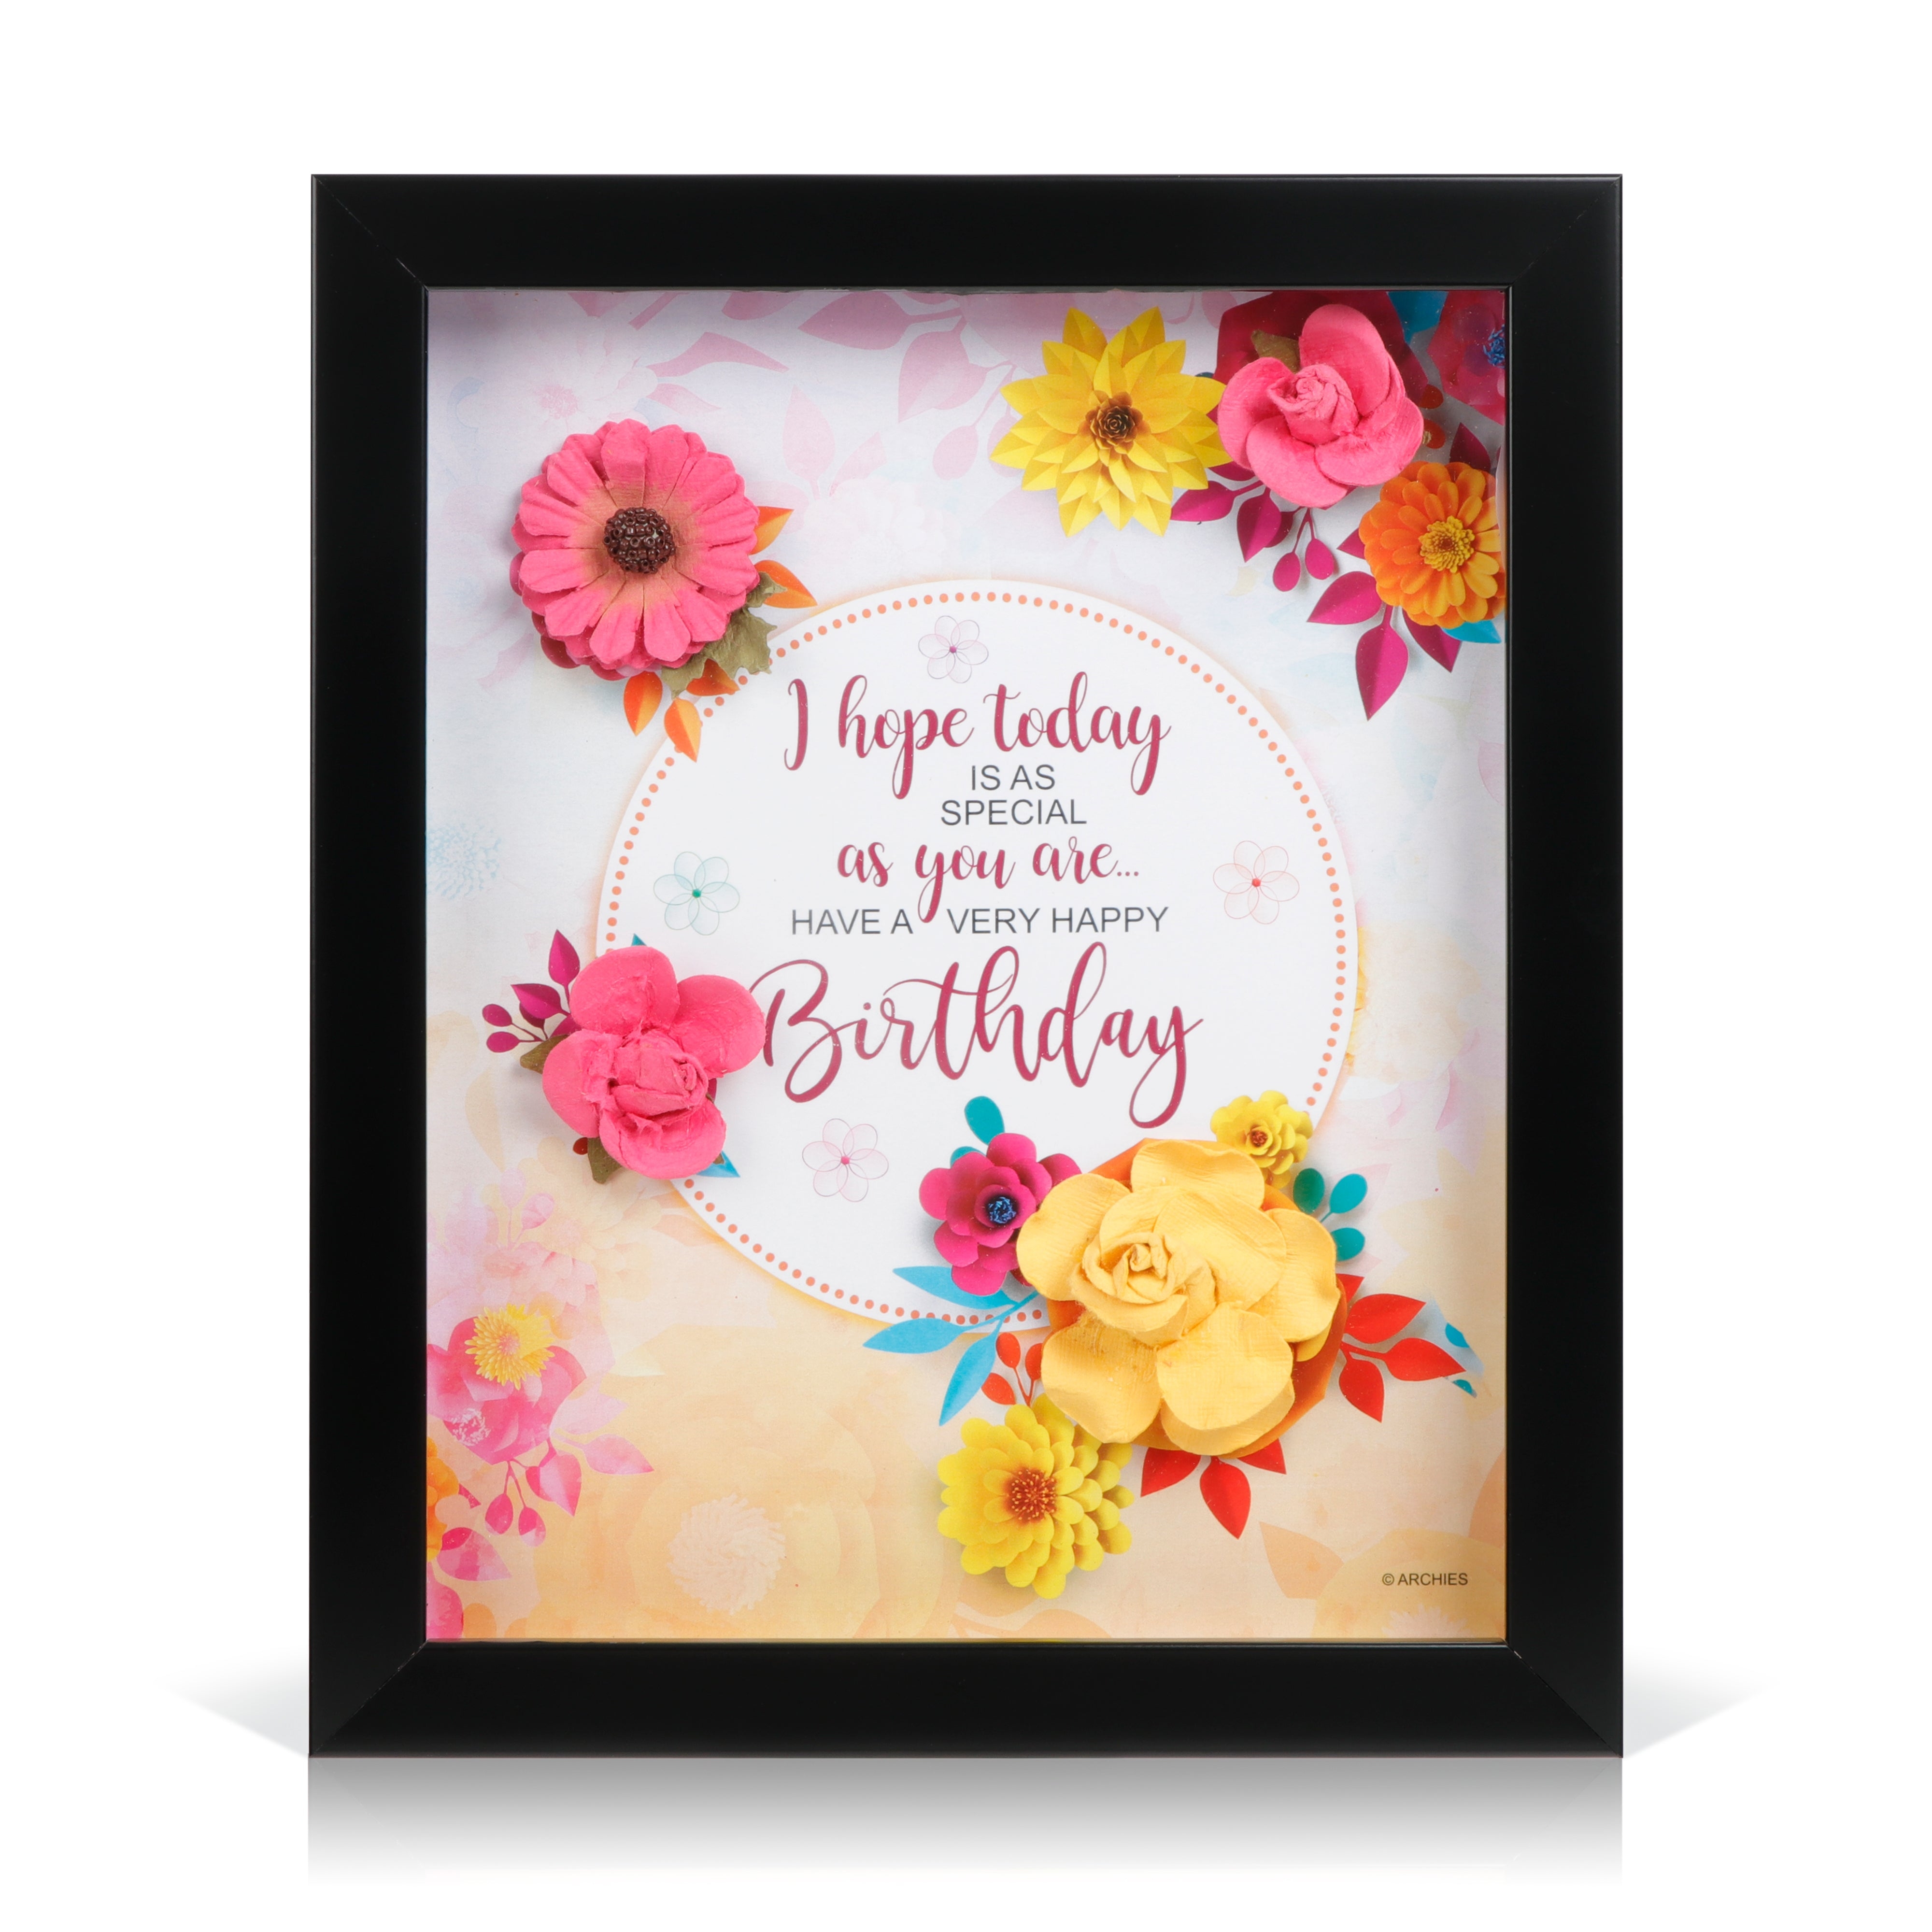 Archies | Archies KEEPSAKE QUOTATION - I HOPE TODAY IS AS ..... For gifting and Home décor